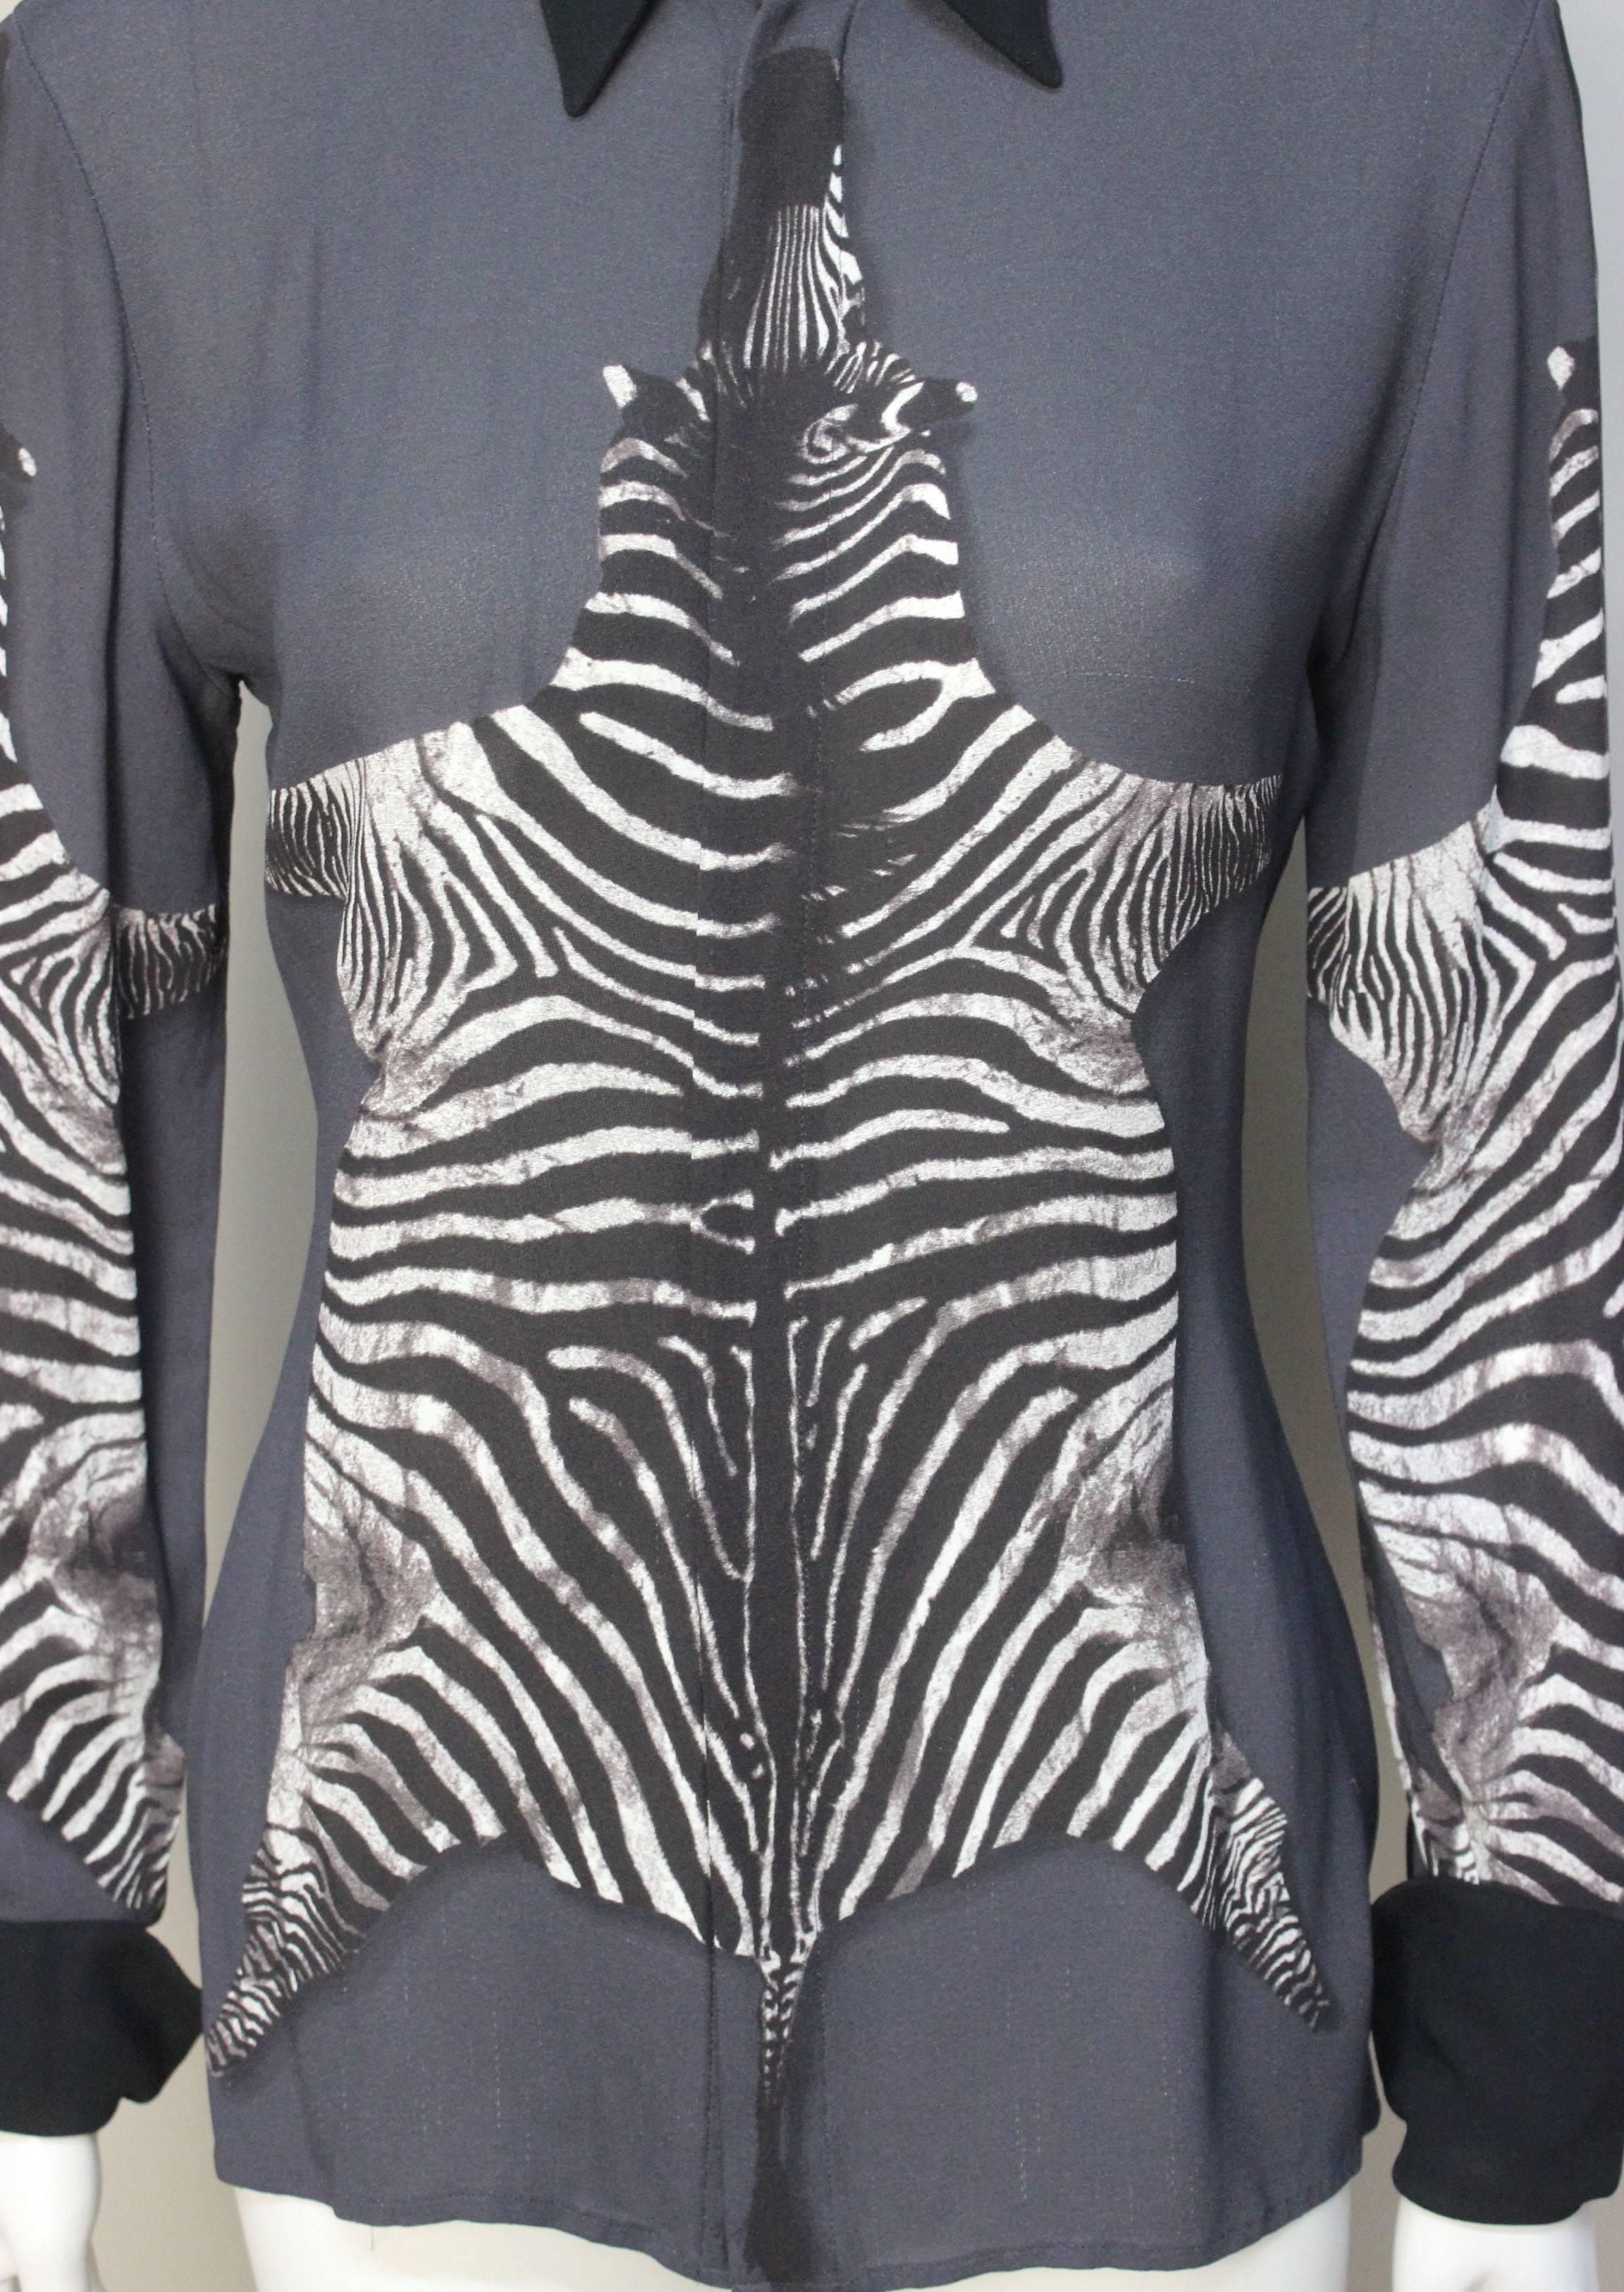 Jean Paul Gaultier Sheer Blouse with Zebra Graphic In Excellent Condition For Sale In New York, NY